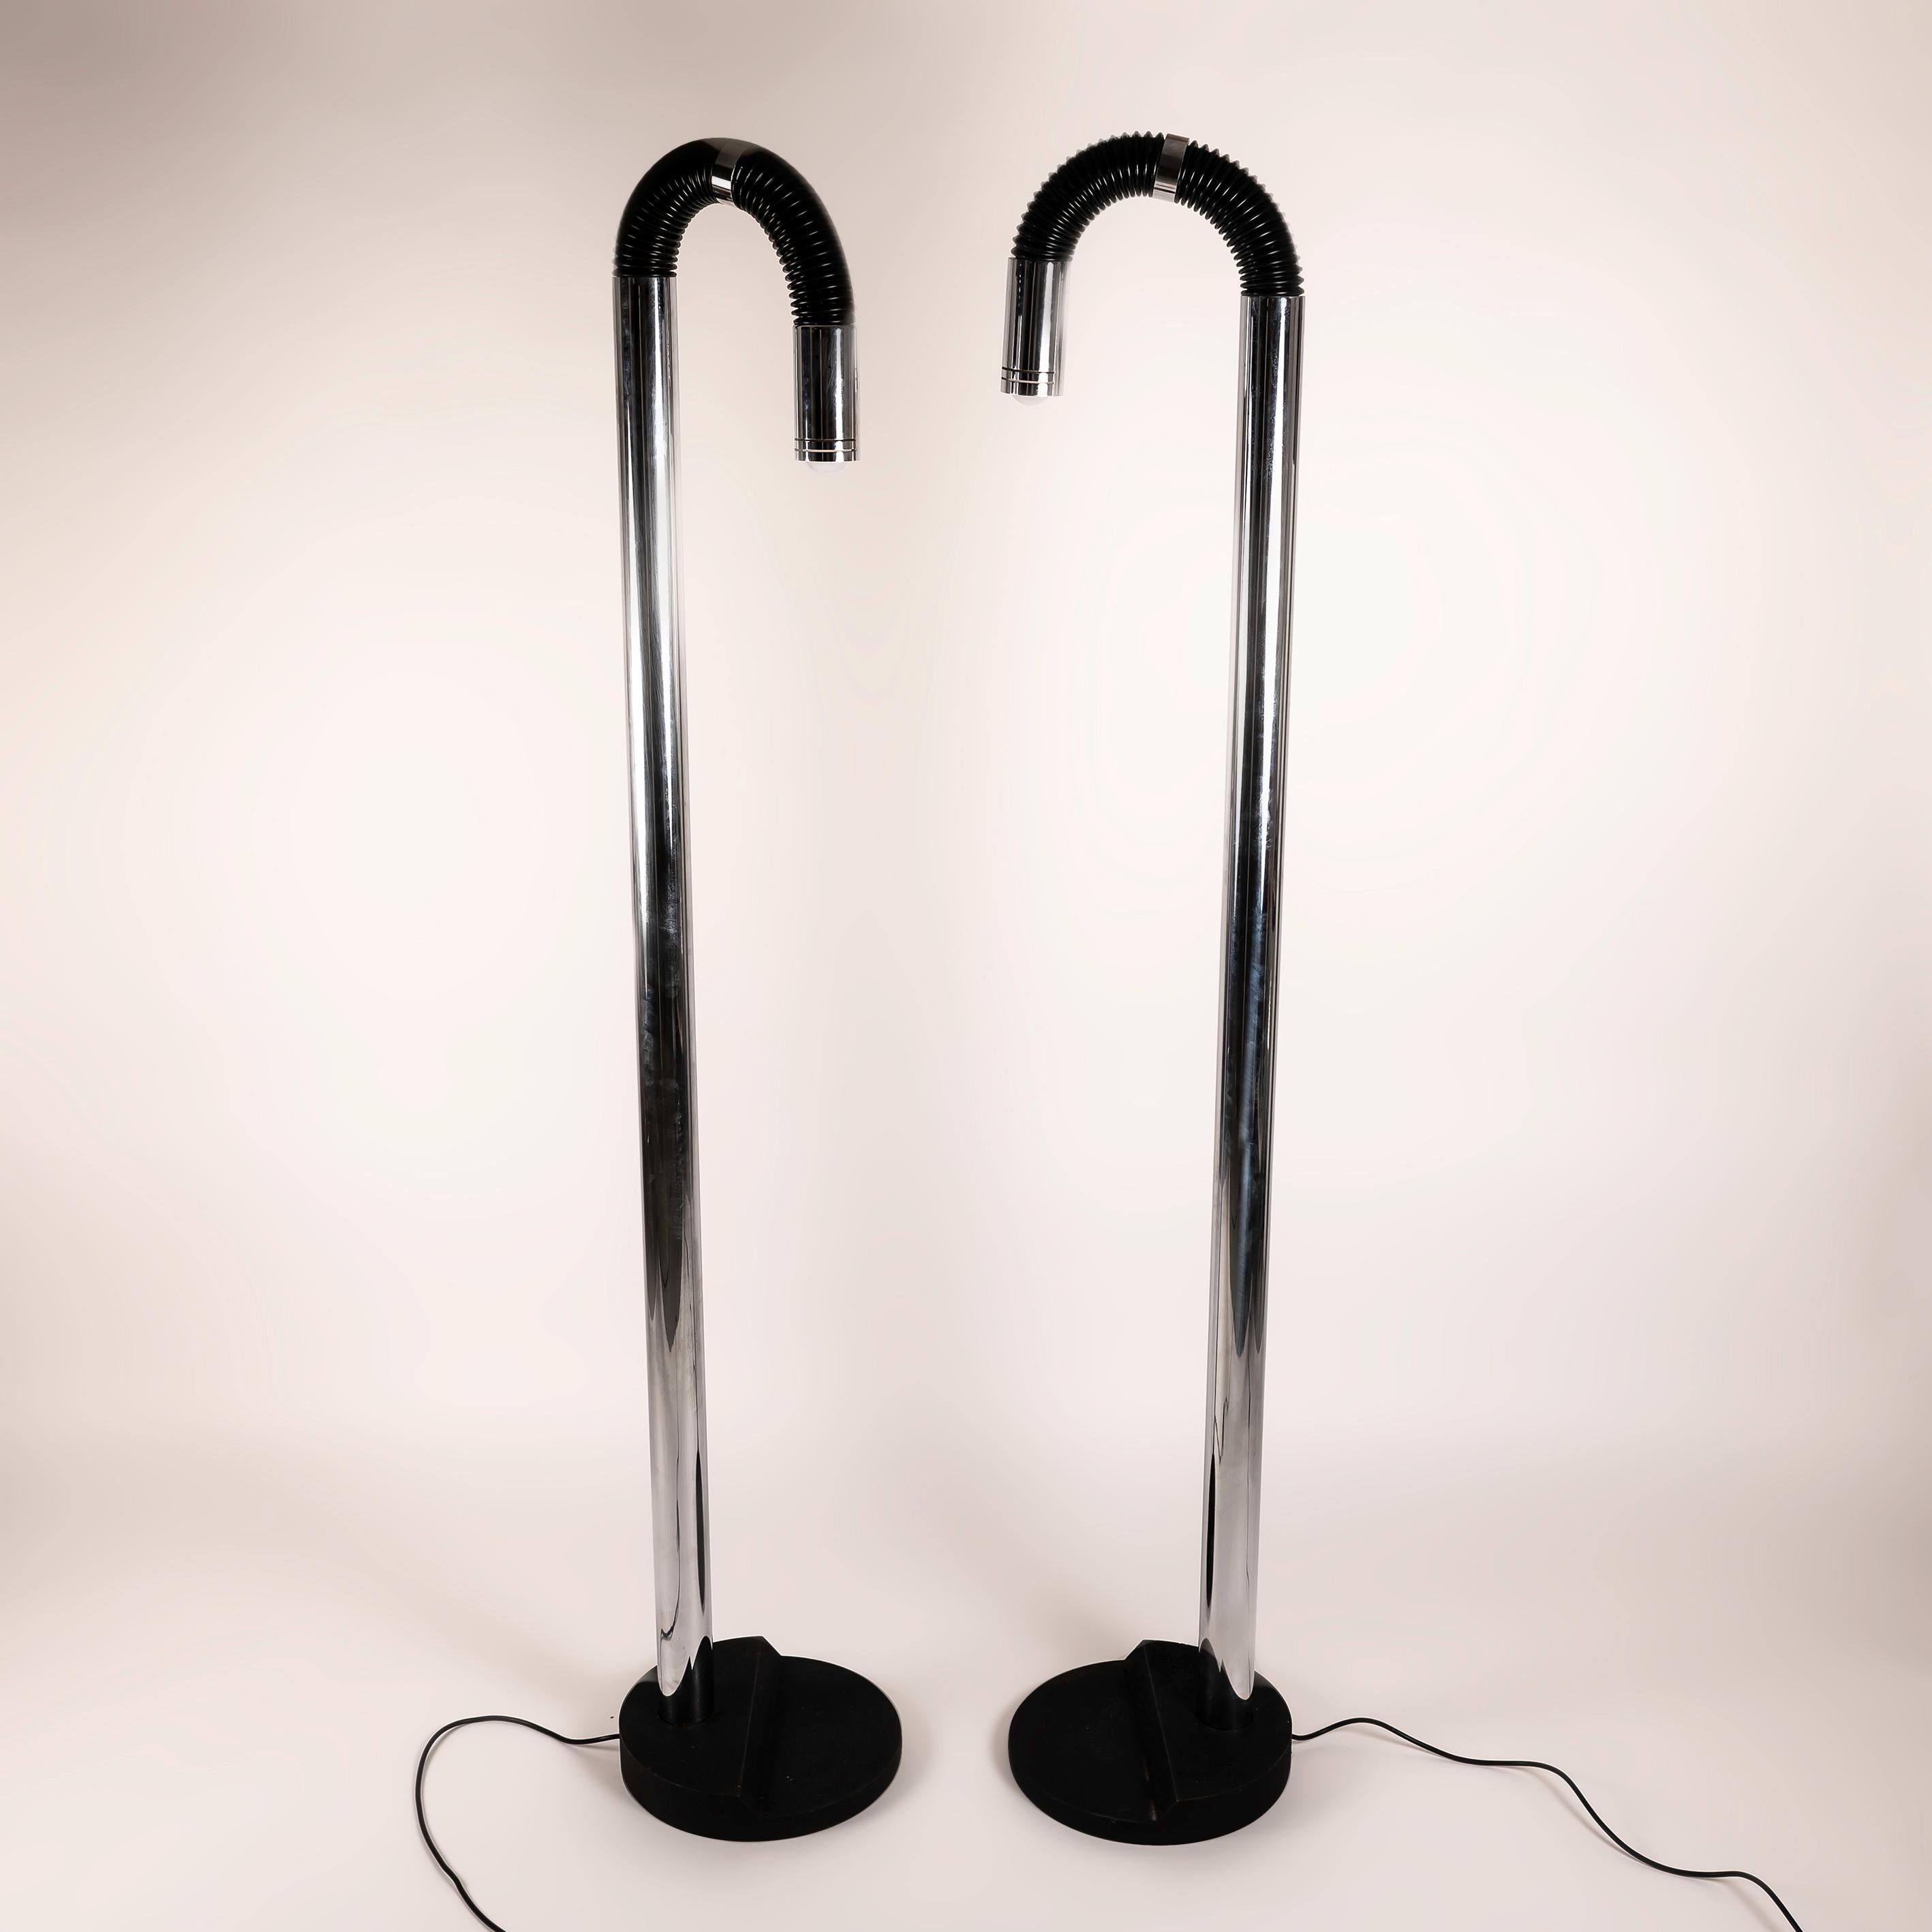 Step into the future with this pair of Space Age Italian floor lamps from the 1970s, an iconic fusion of form and function. Crafted from lacquered iron and chromed metal, these lamps exude a retro-futuristic charm. The sleek lines and avant-garde